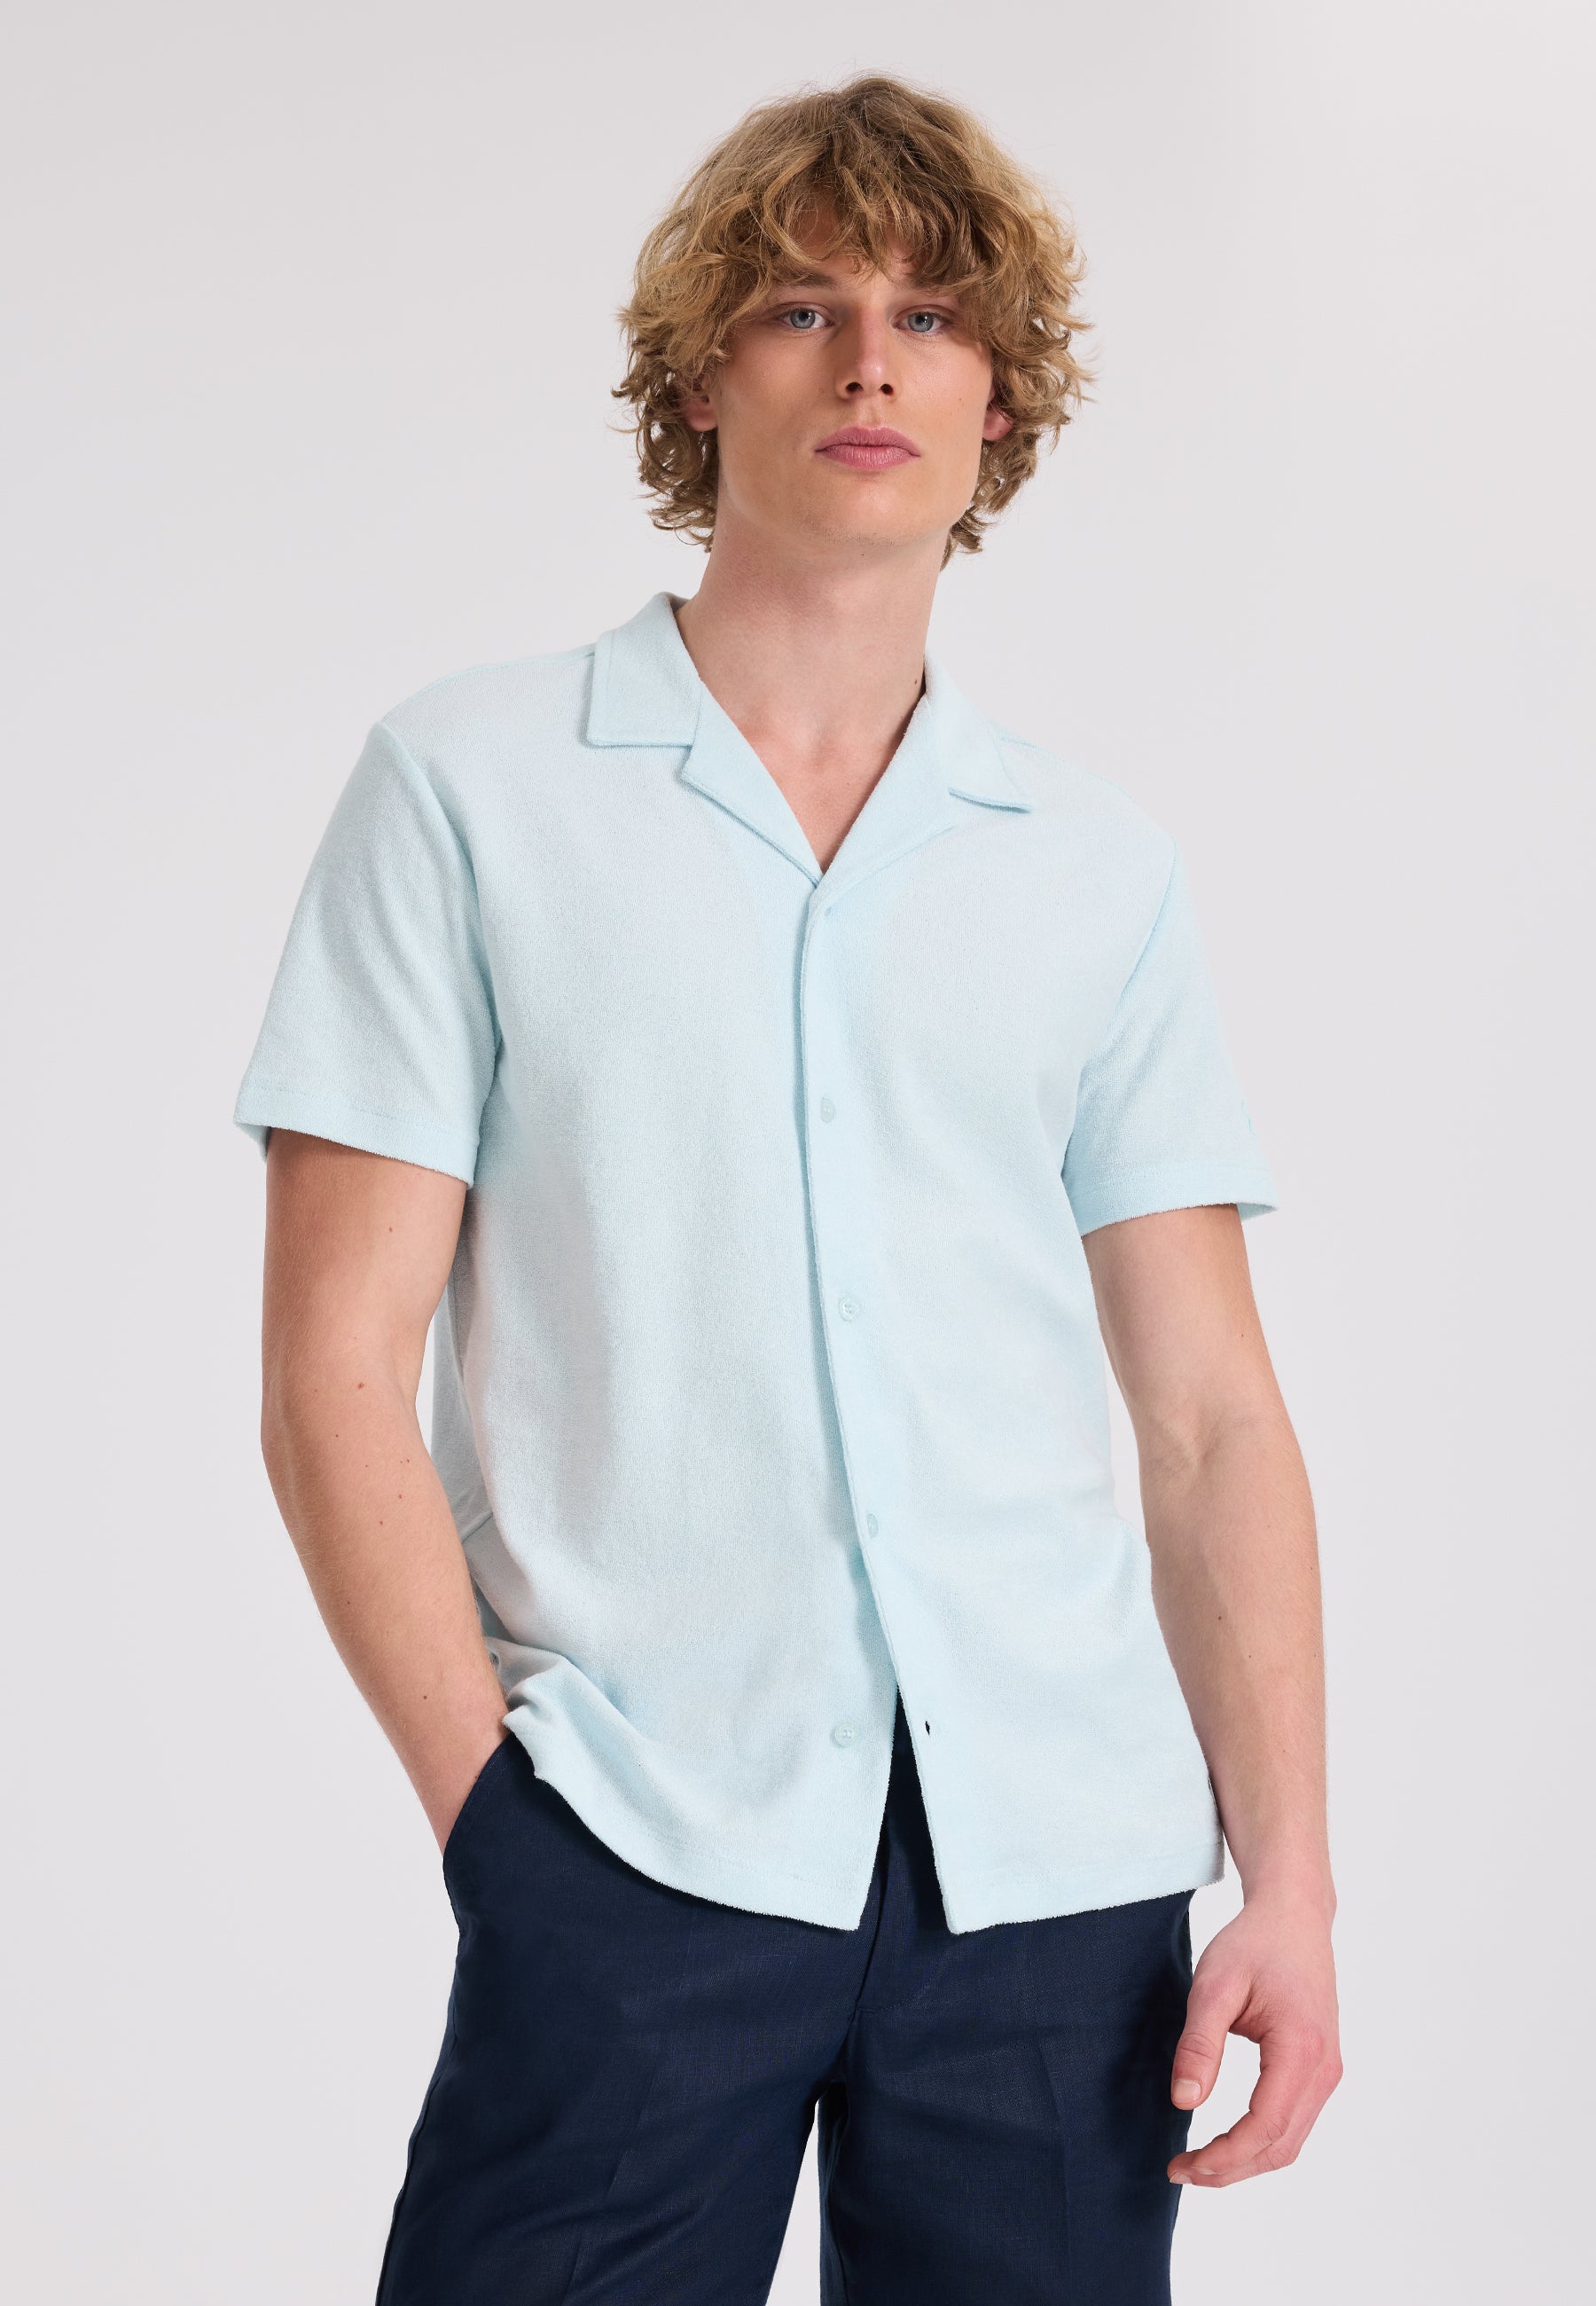 BREEZE TERRY TOWELLING S/S SHIRT in Skylight